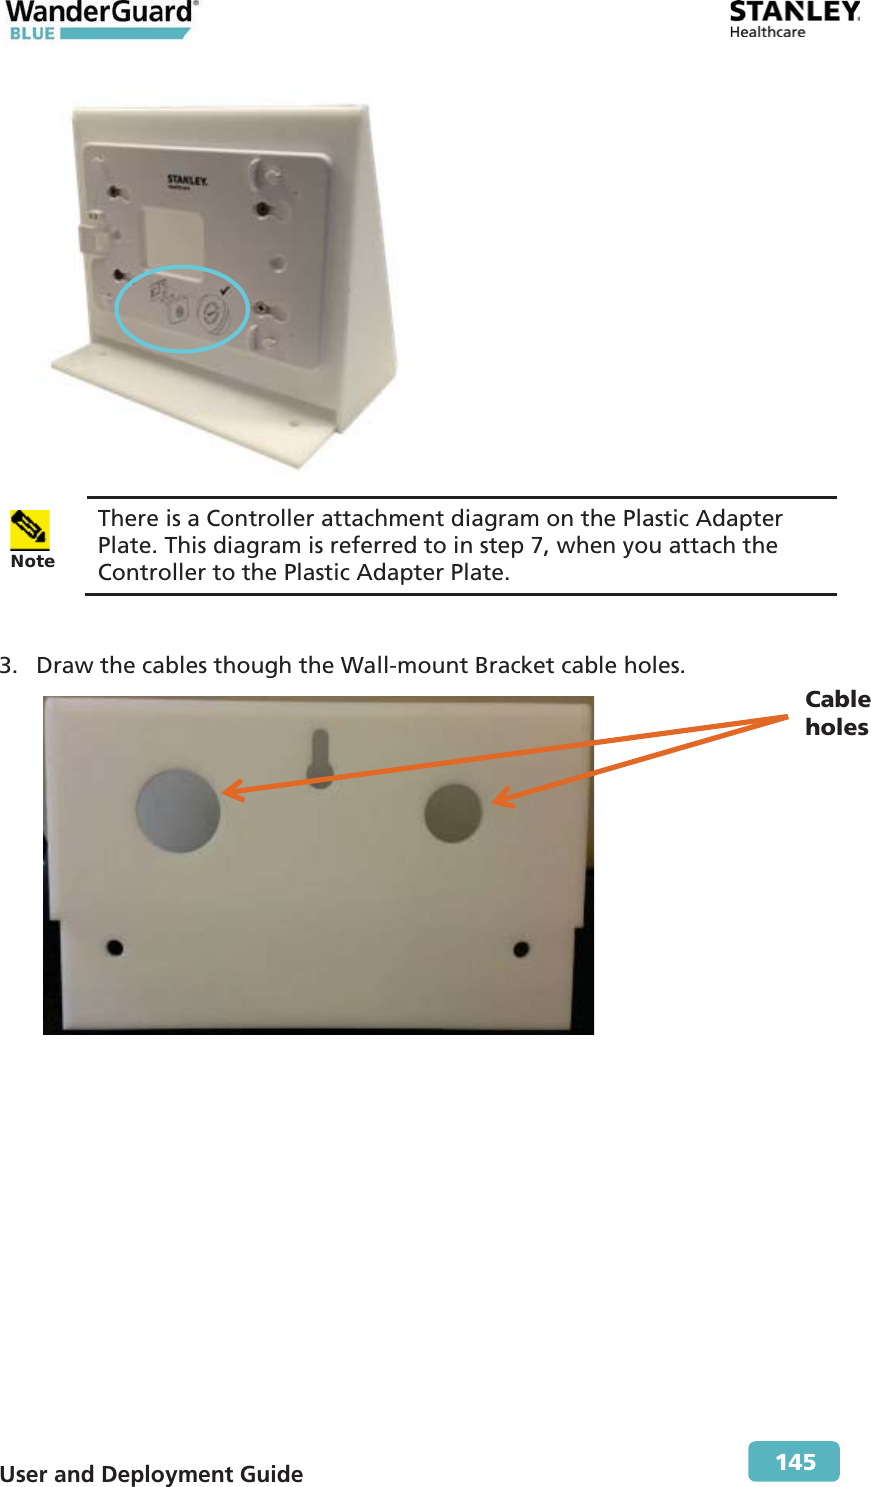  User and Deployment Guide        145   Note There is a Controller attachment diagram on the Plastic Adapter Plate. This diagram is referred to in step  7, when you attach the Controller to the Plastic Adapter Plate.  3. Draw the cables though the Wall-mount Bracket cable holes.   Cable  holes 